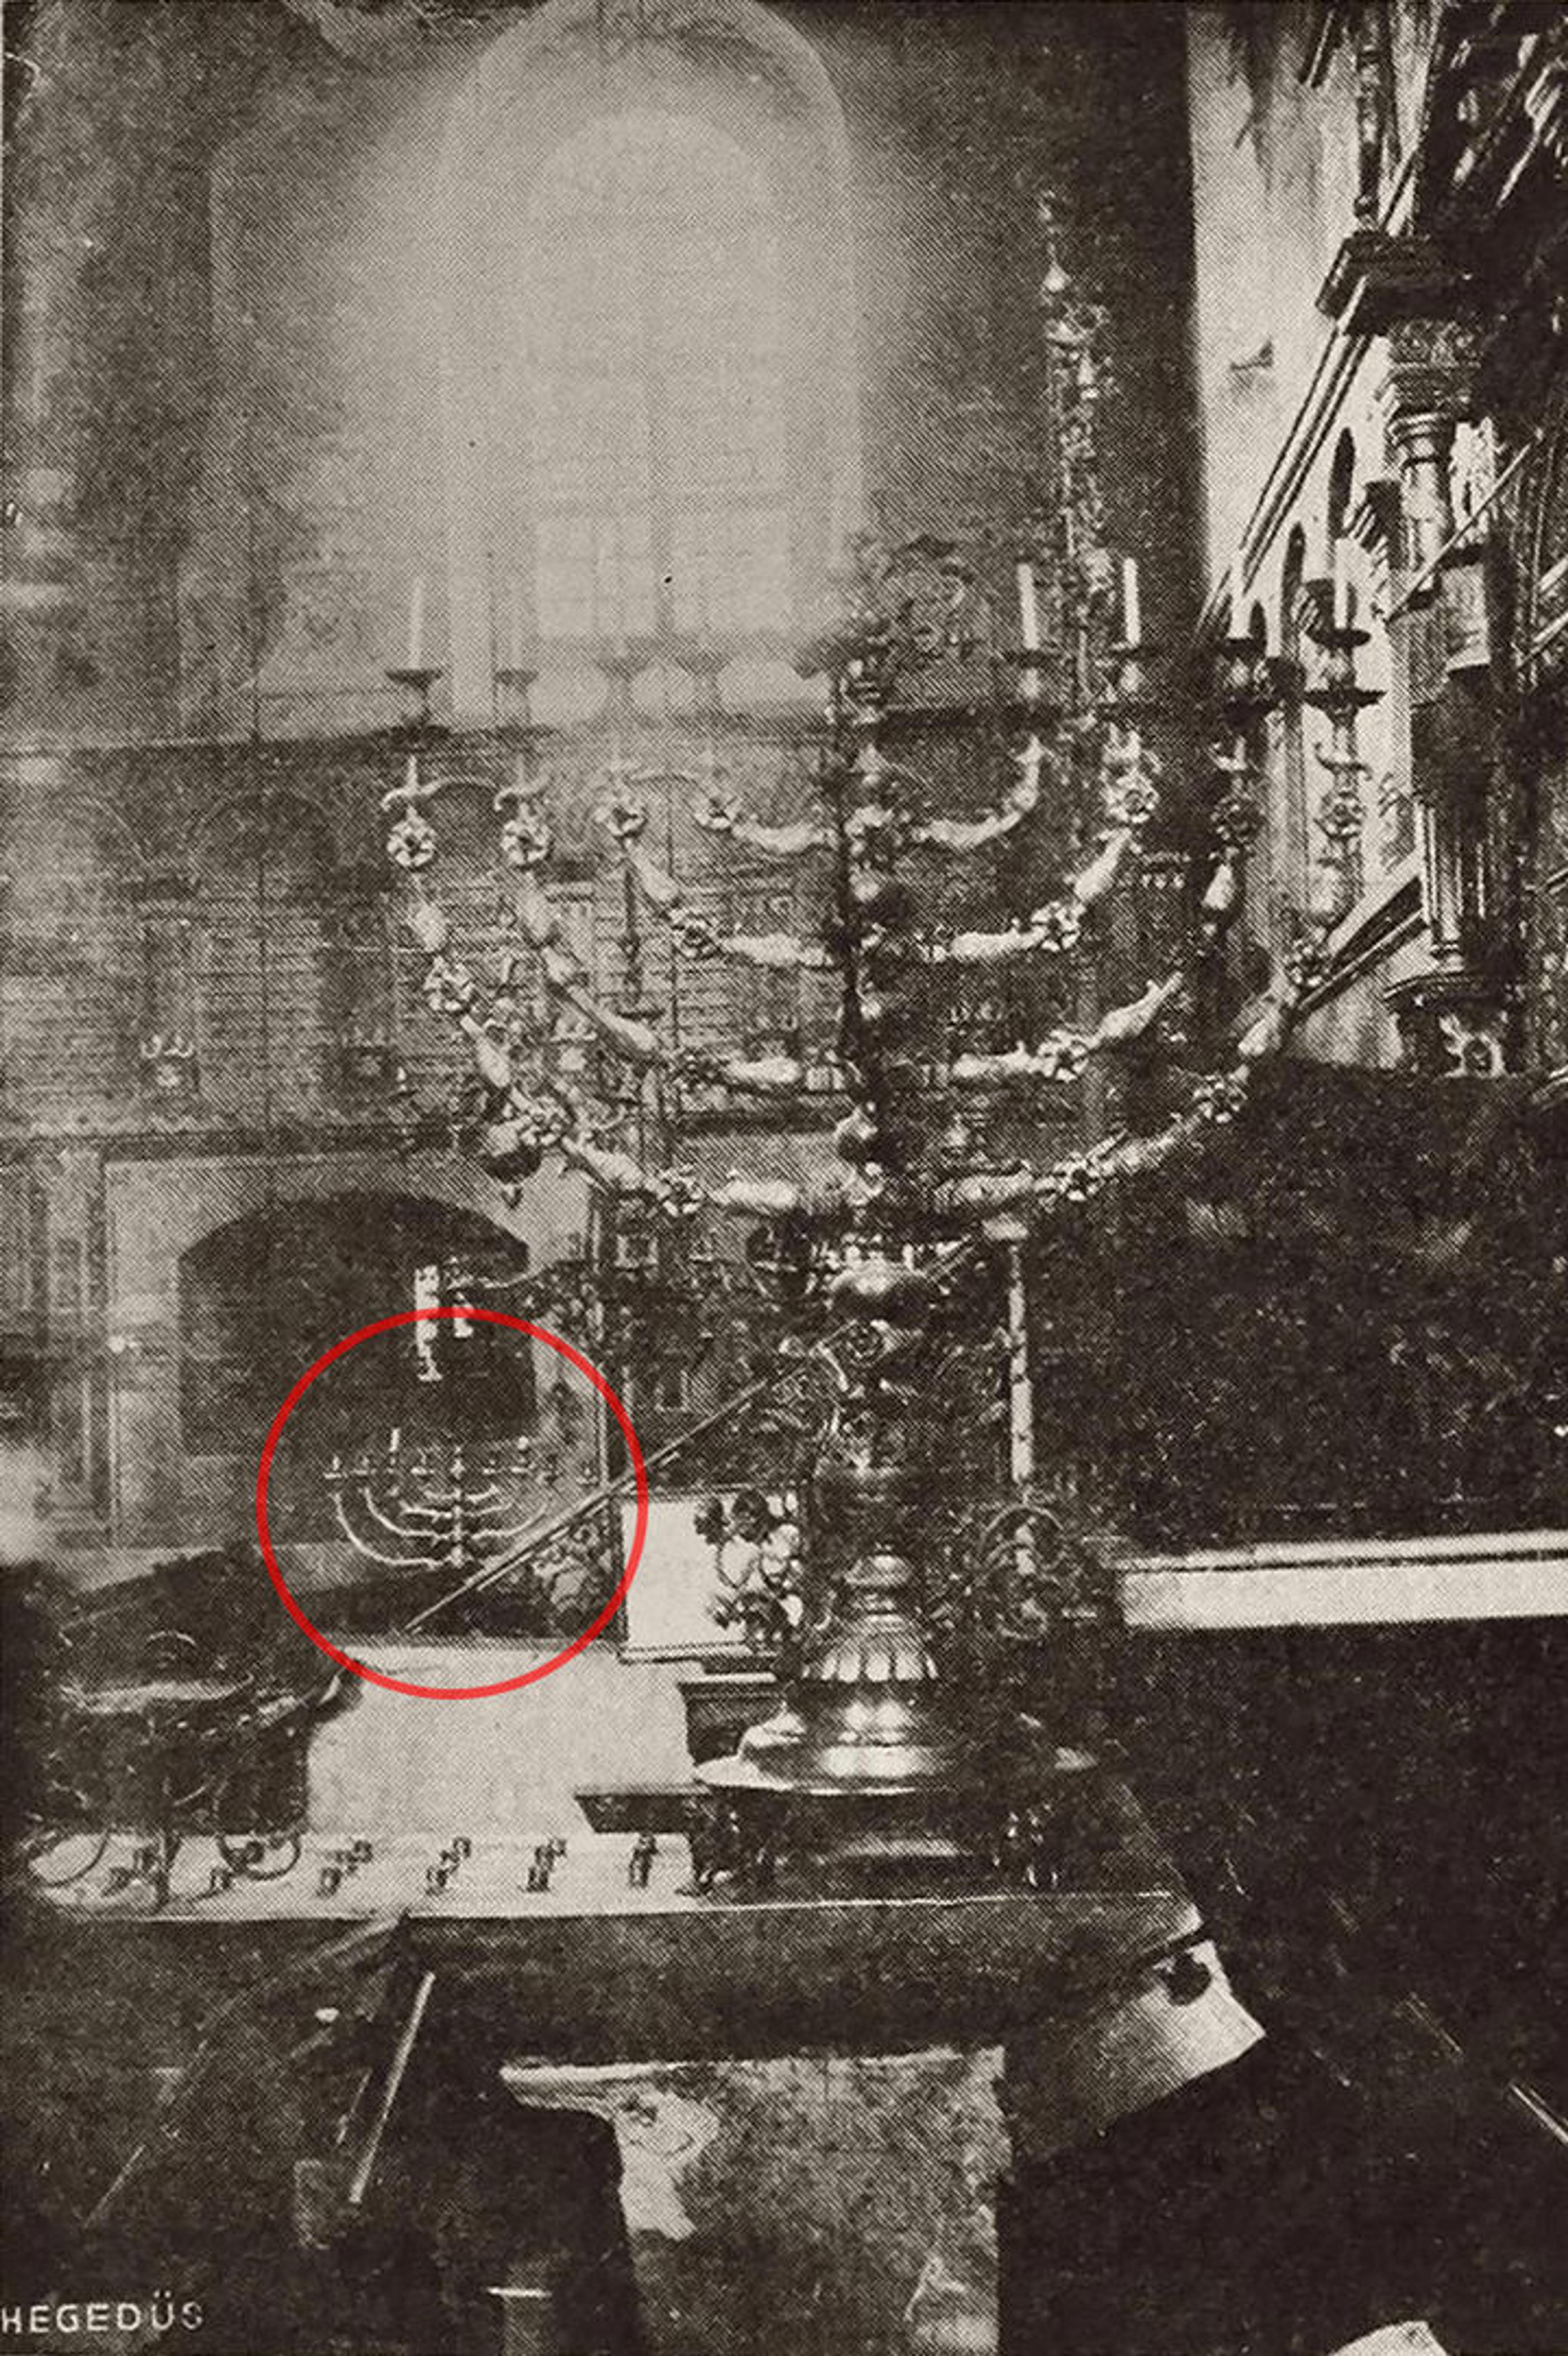 An old photo of a large menorah